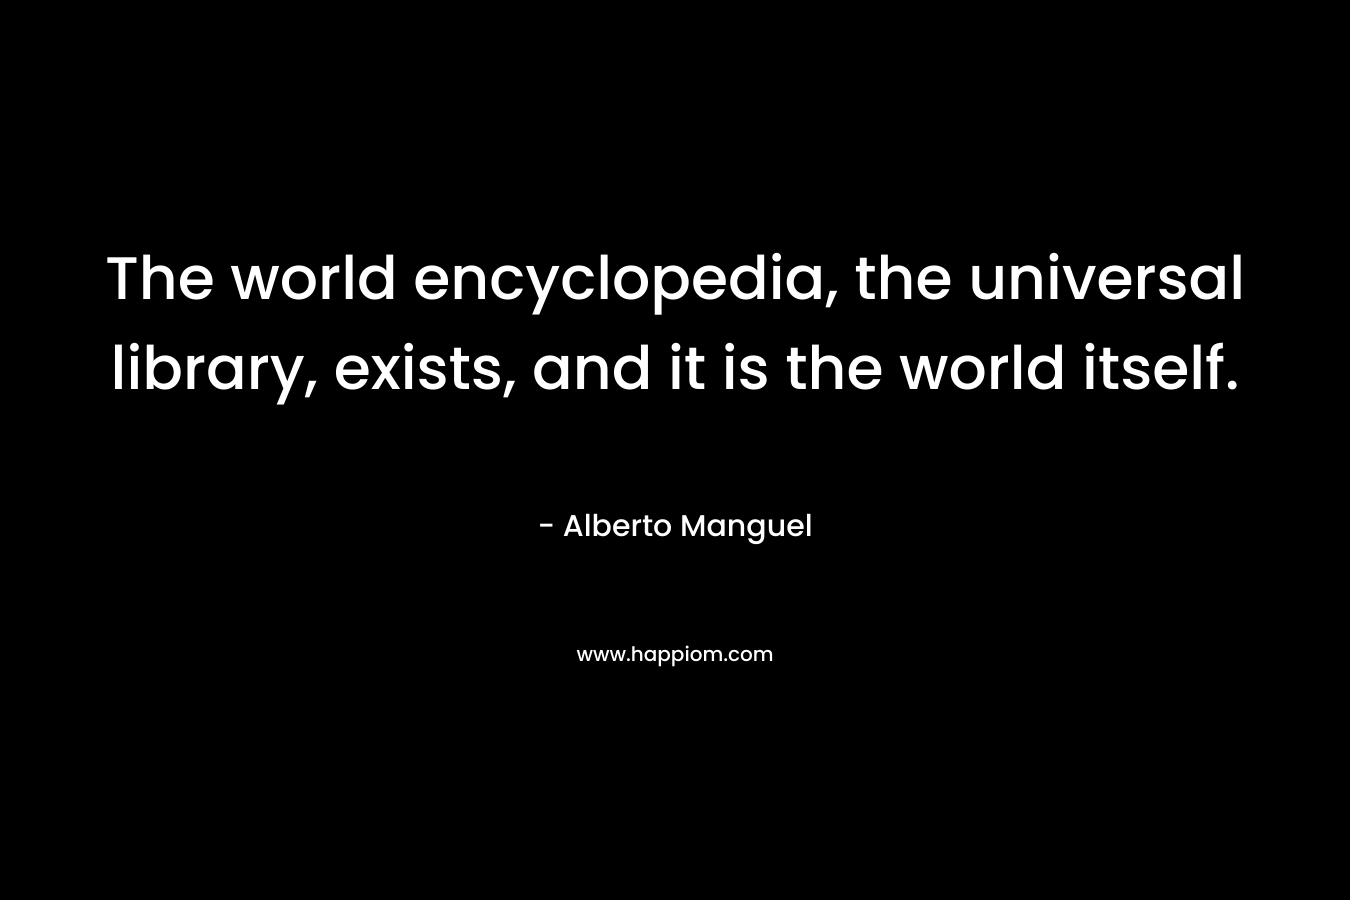 The world encyclopedia, the universal library, exists, and it is the world itself. – Alberto Manguel